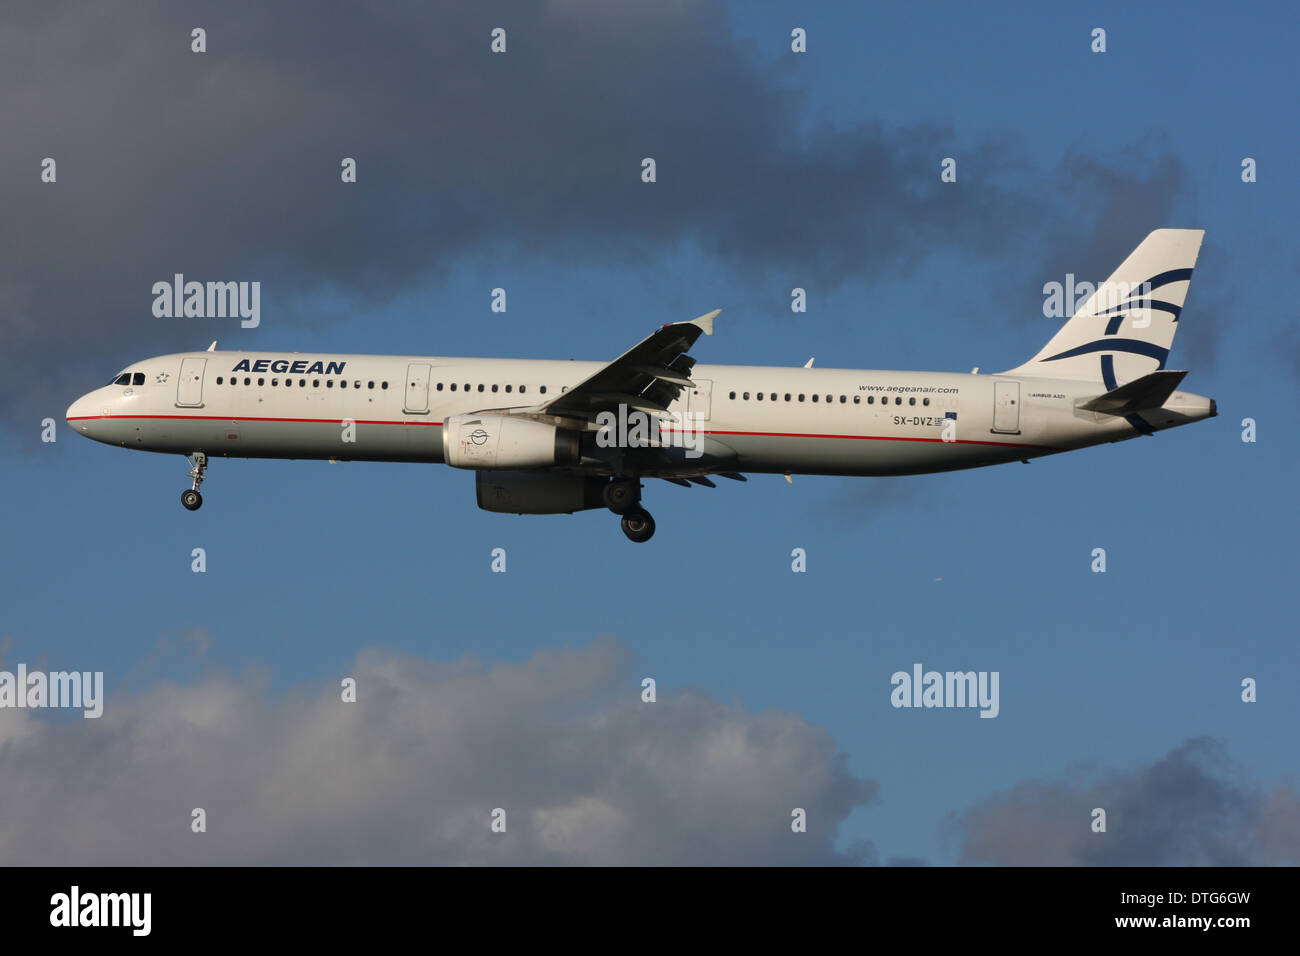 AEGEAN AIRLINES AIRBUS A321 Stock Photo